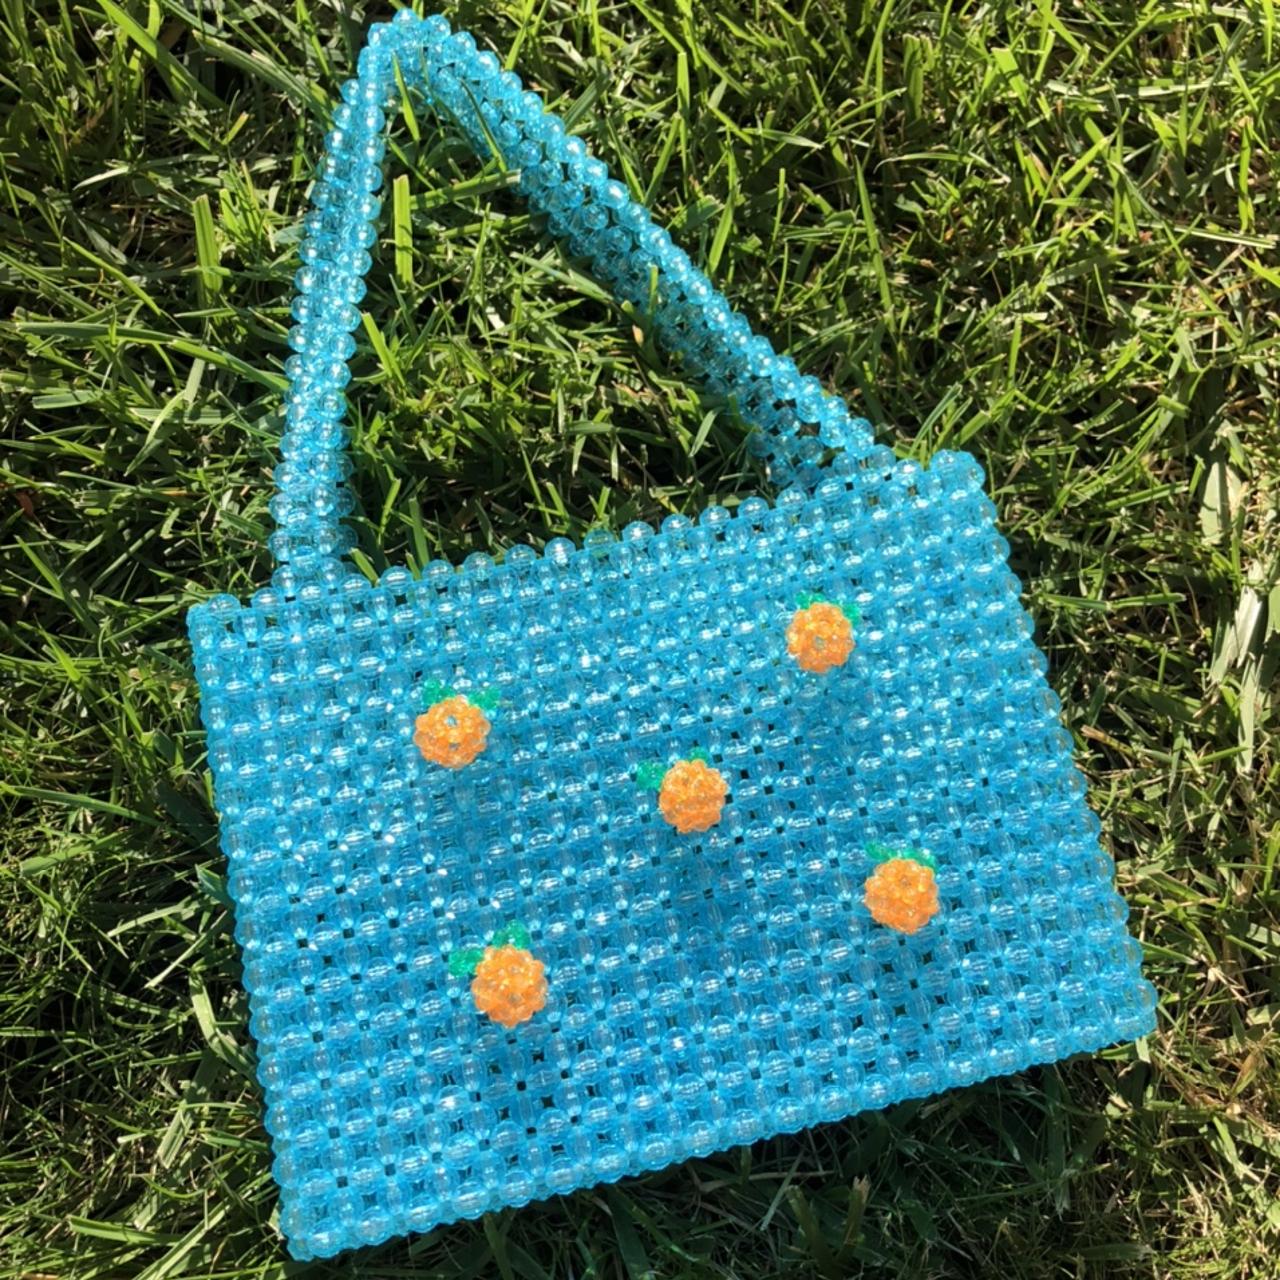 New Toyboy jelly purse in cobalt blue. Gold accents. - Depop